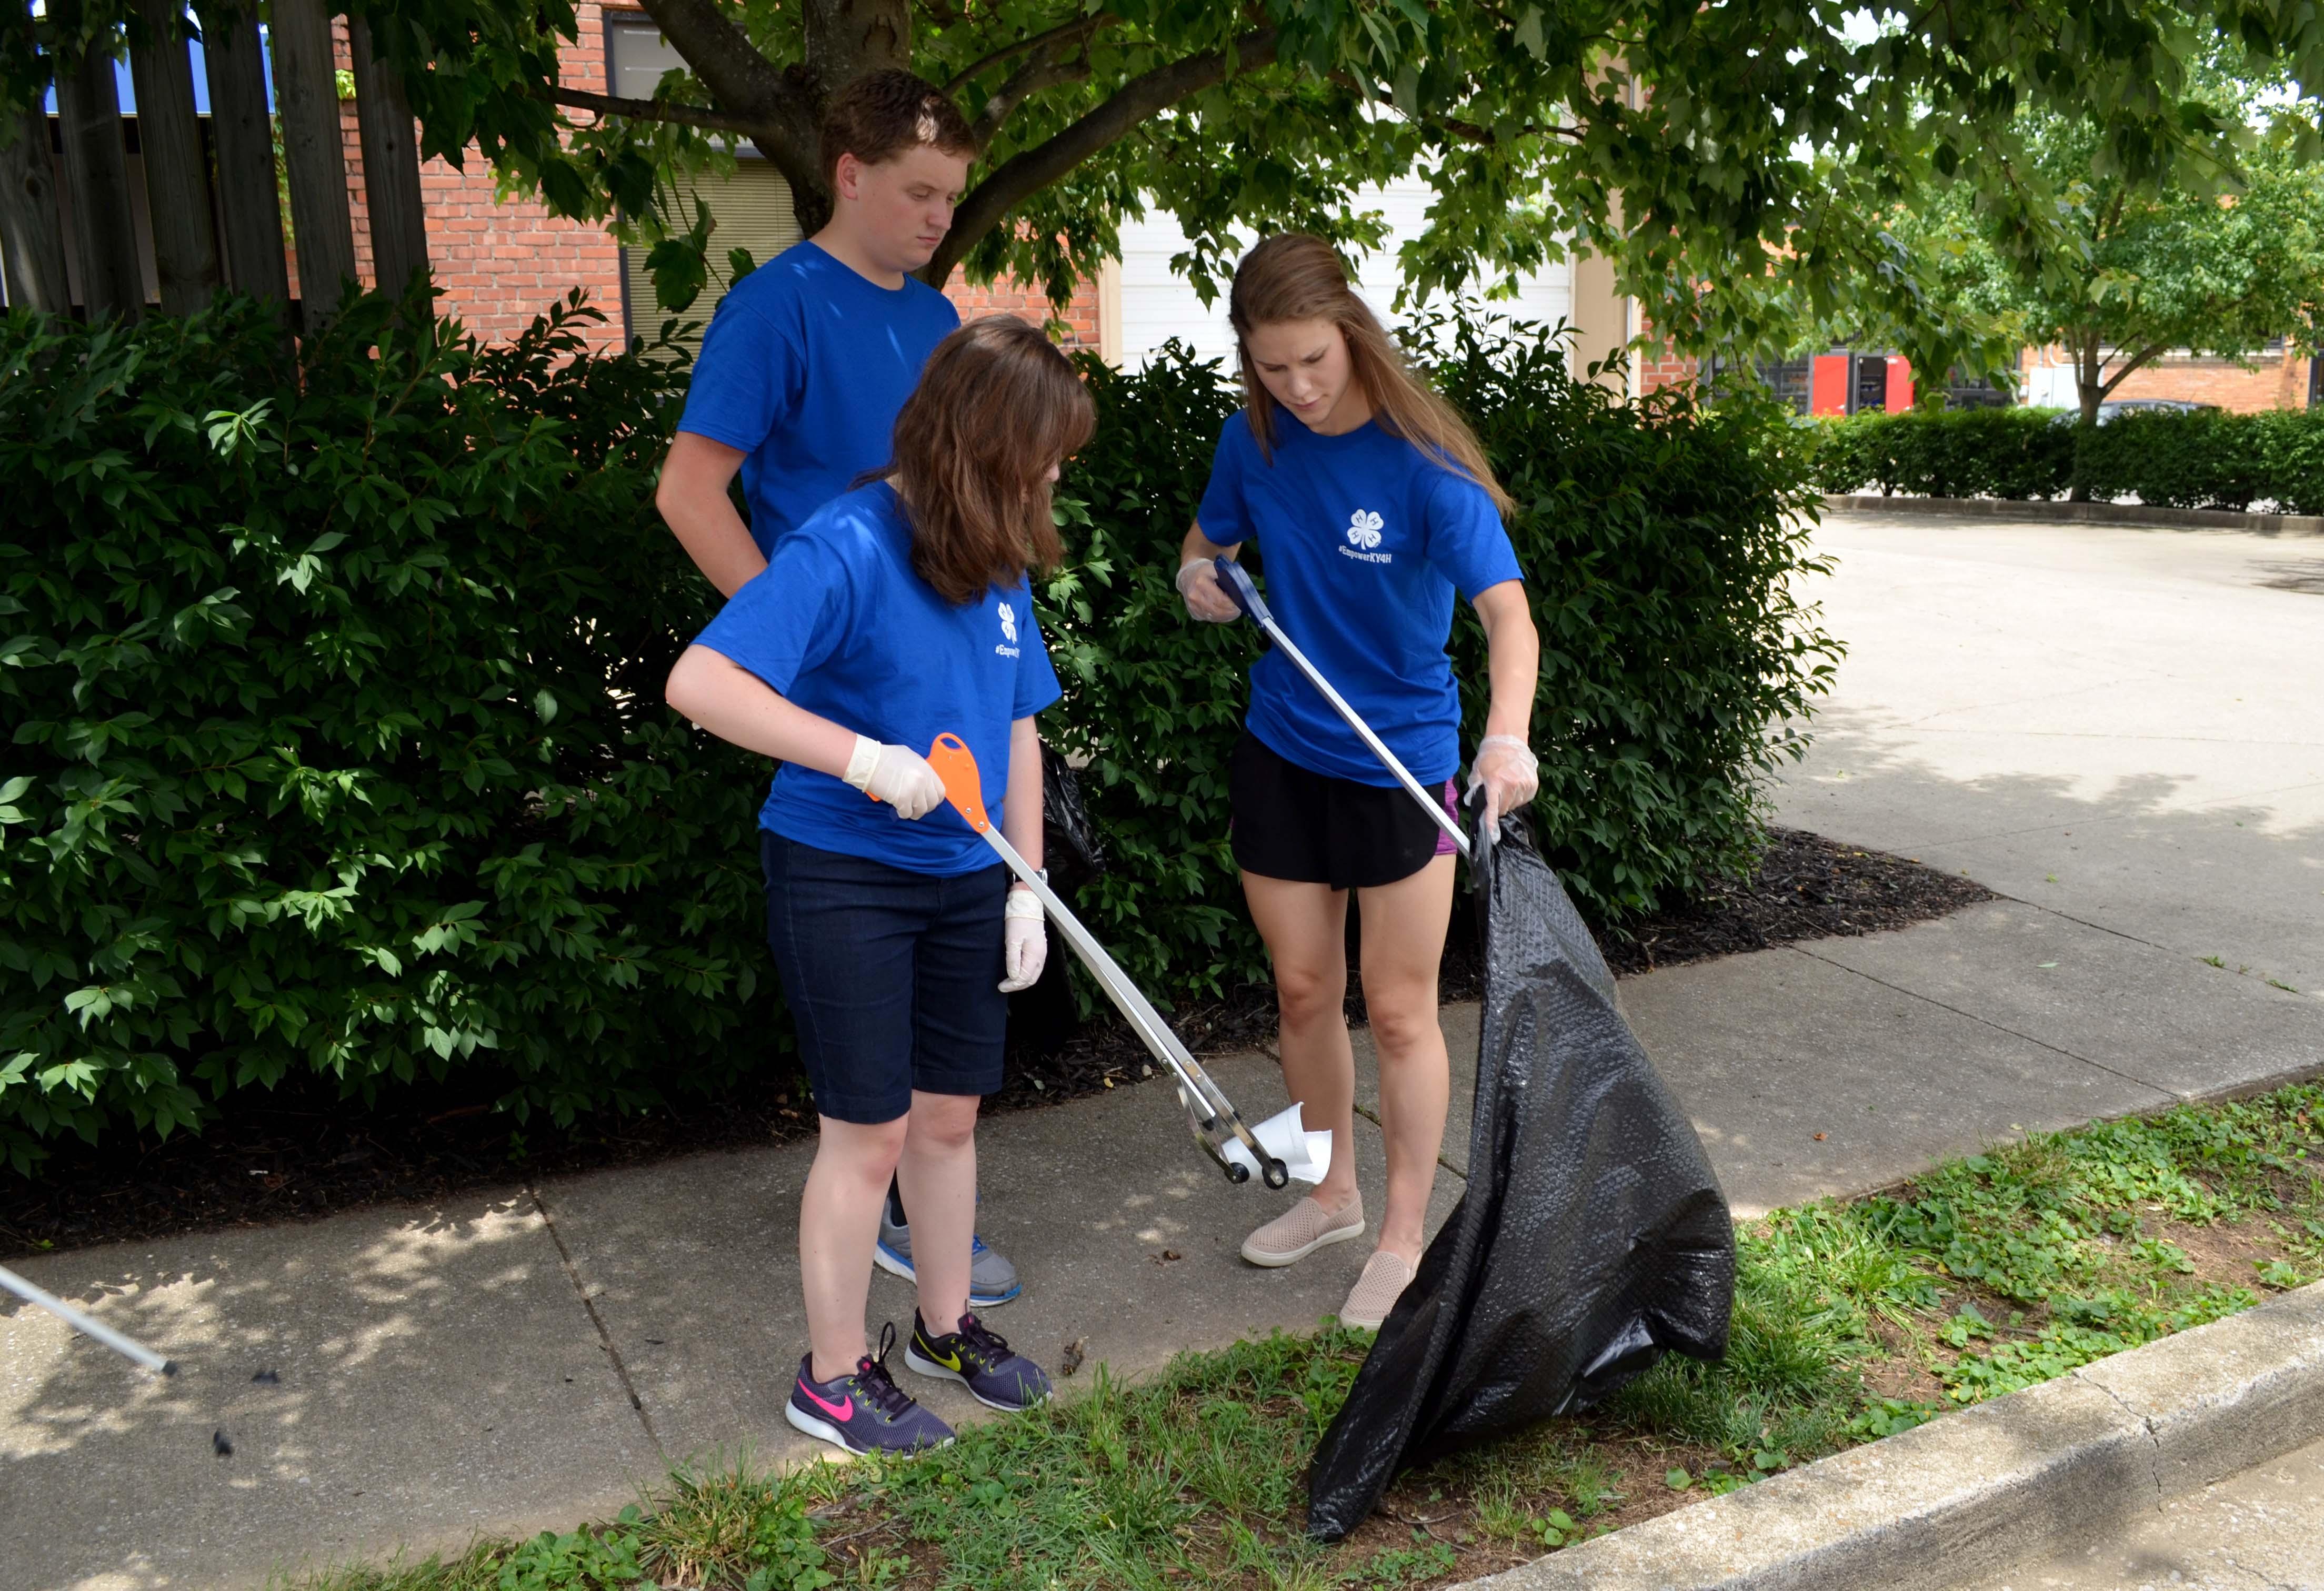 Kentucky 4-H'ers pick up litter in a Lexington community as part of their community service project at 4-H Teen Conference.